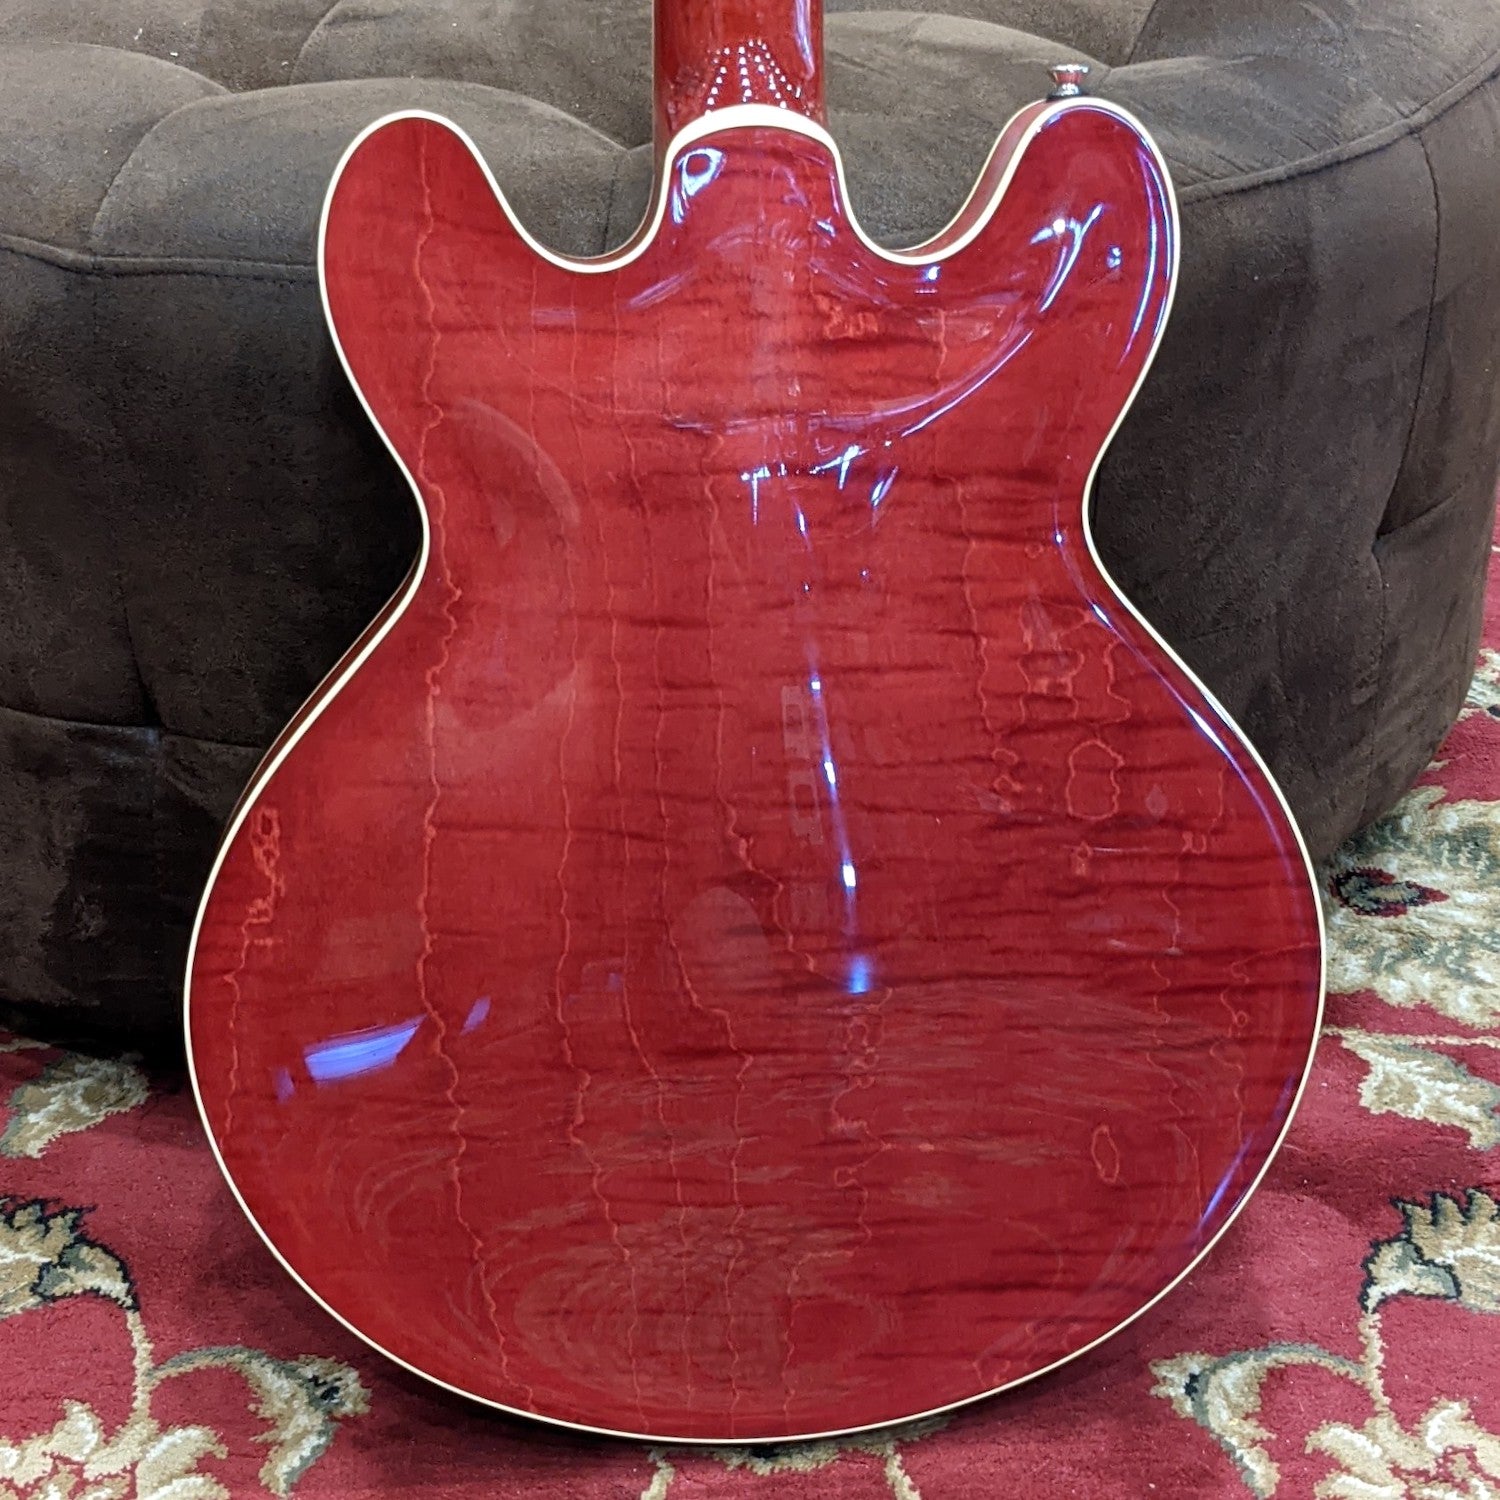 Collings i35 LC  Faded Cherry